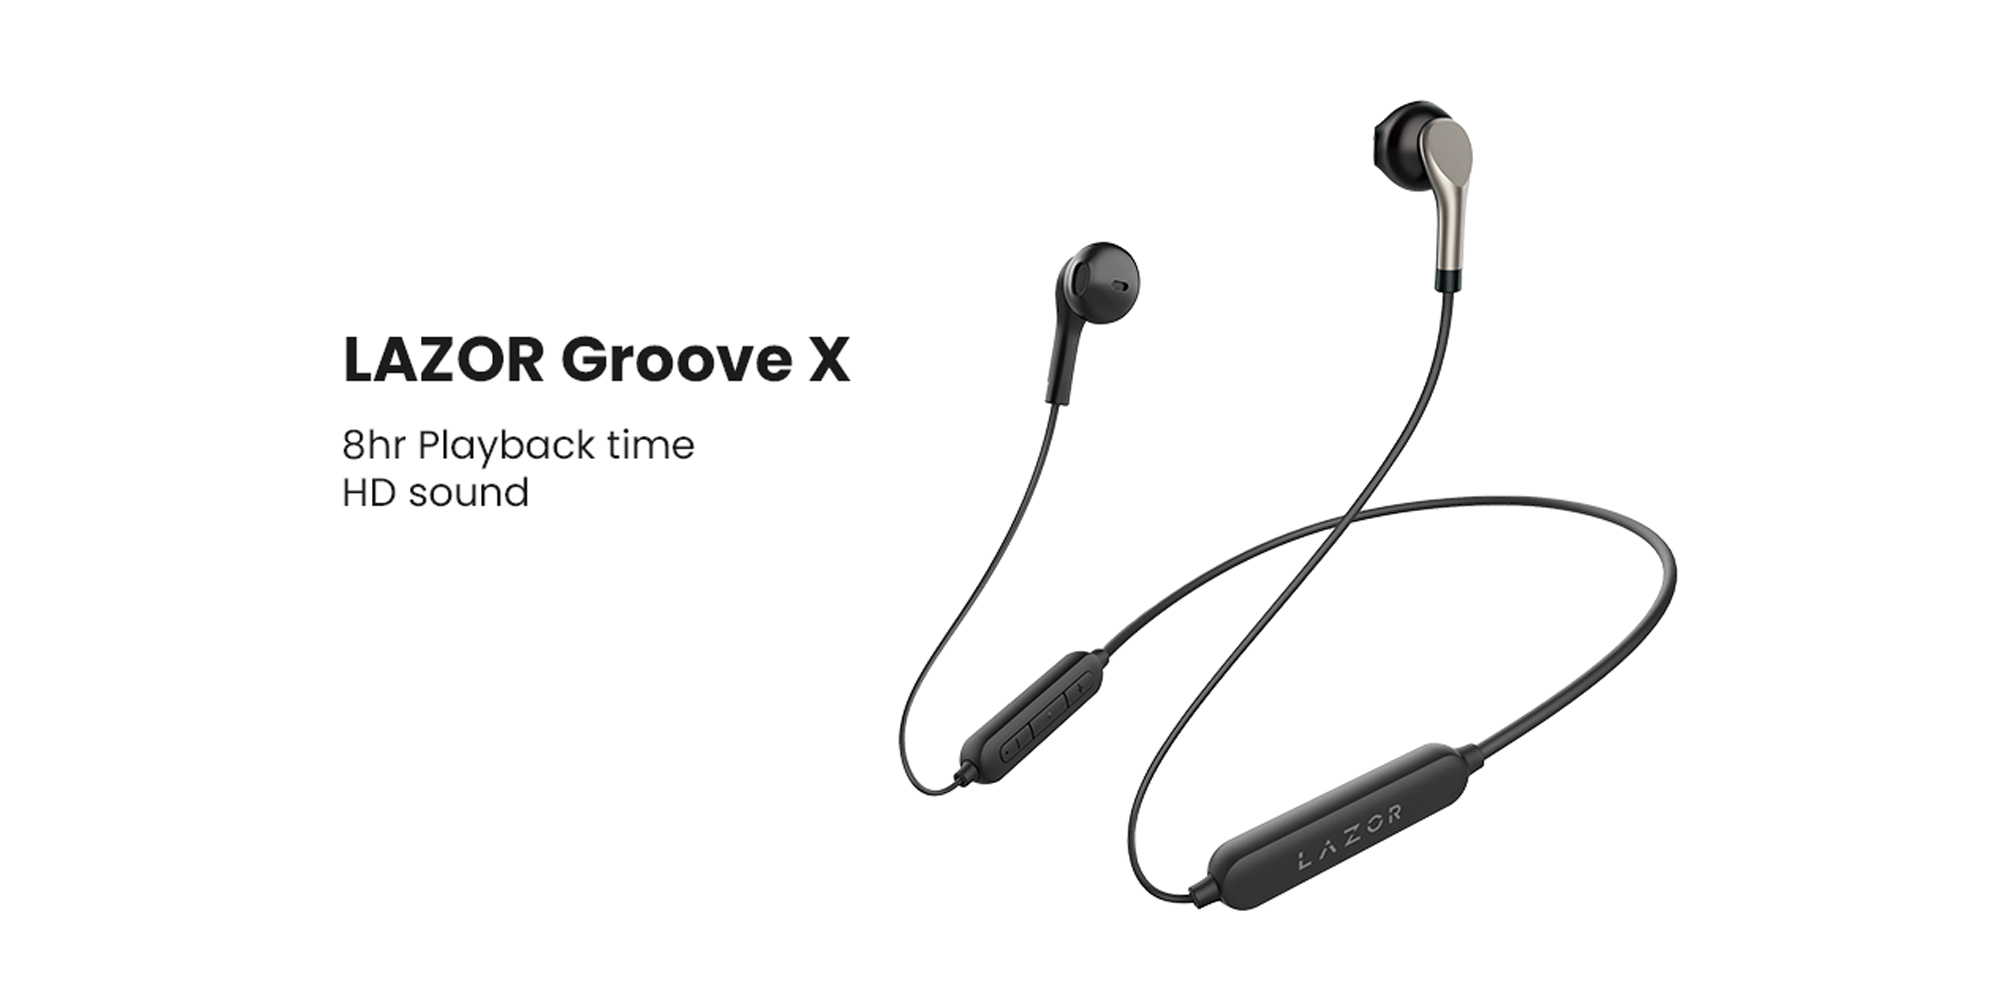 LAZOR Groove-X EA107: Wireless Neckband Earphones with Stereo Sound, IPX4, Up to 8 hrs Playback Time, Multifunction Control, Bluetooth Version 5.0 - Black